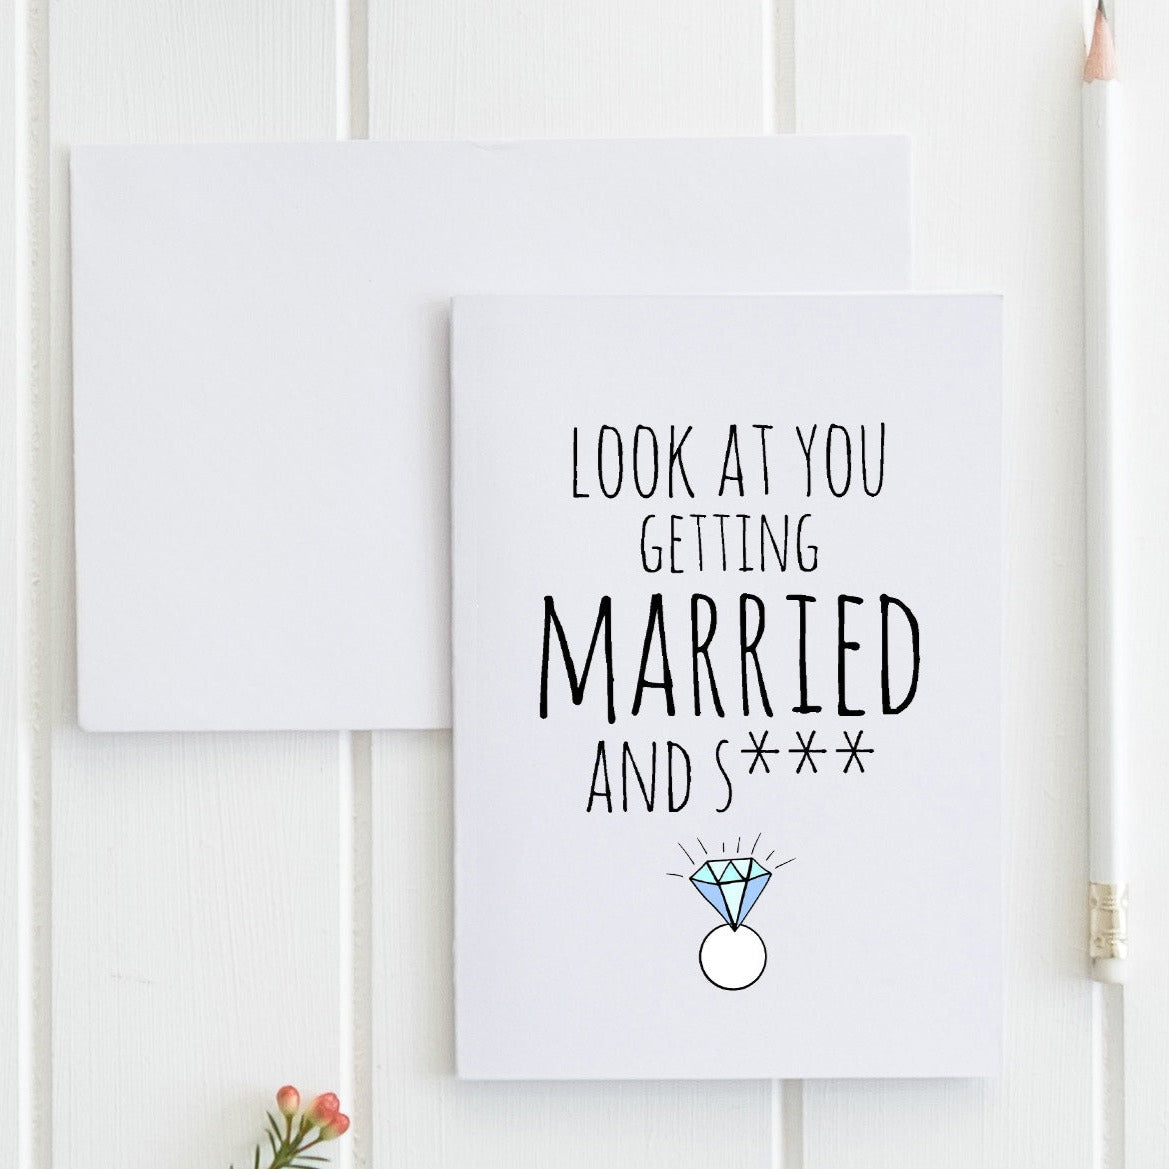 Look At You Getting Married & S**t - Greeting Card